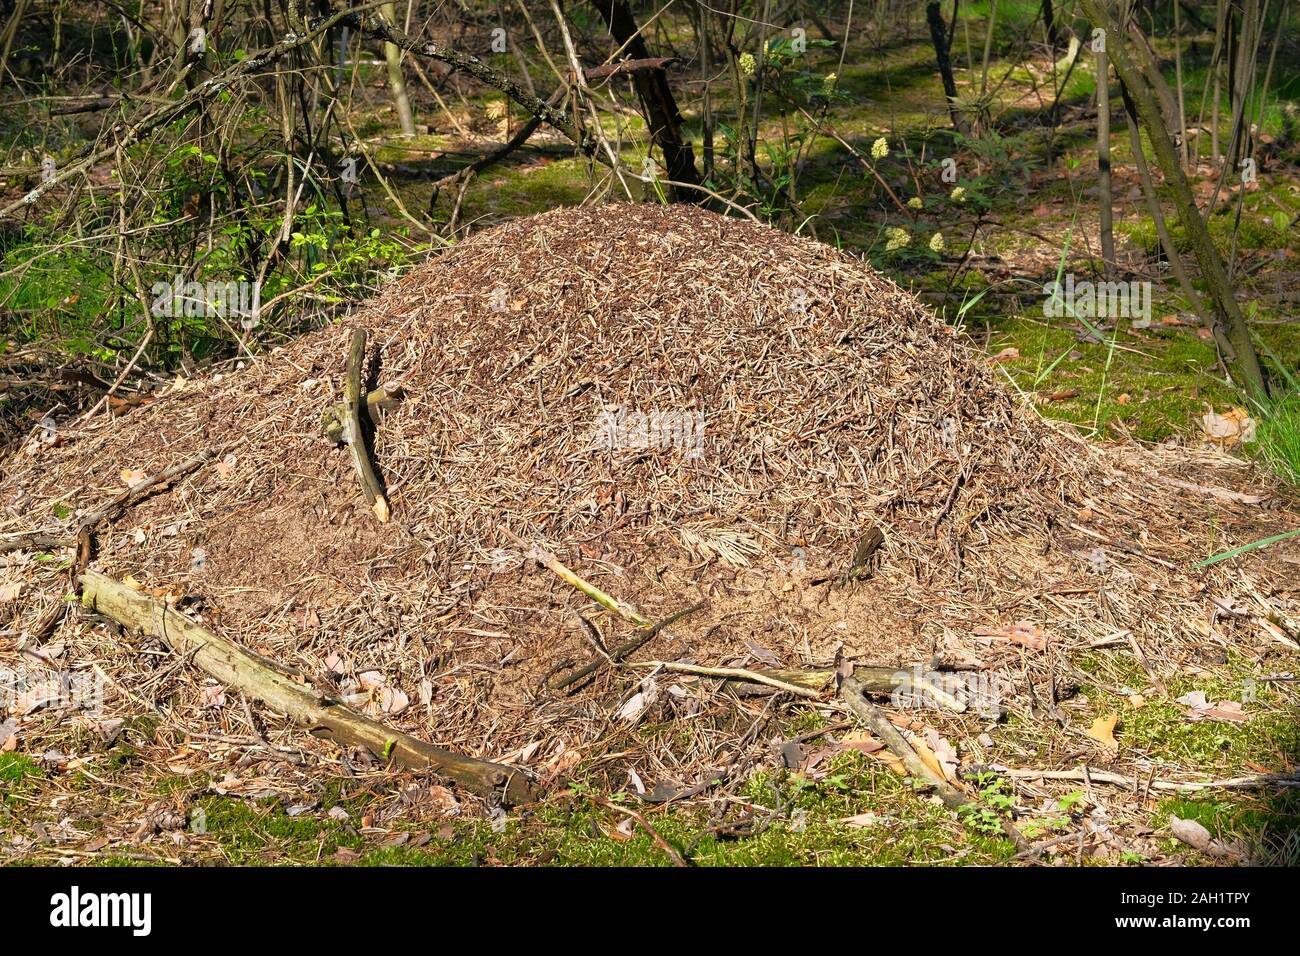 Anthill in summer forest scene. Big anthill with colony of ants in summer forest. Nature Wildlife, close-up. Stock Photo